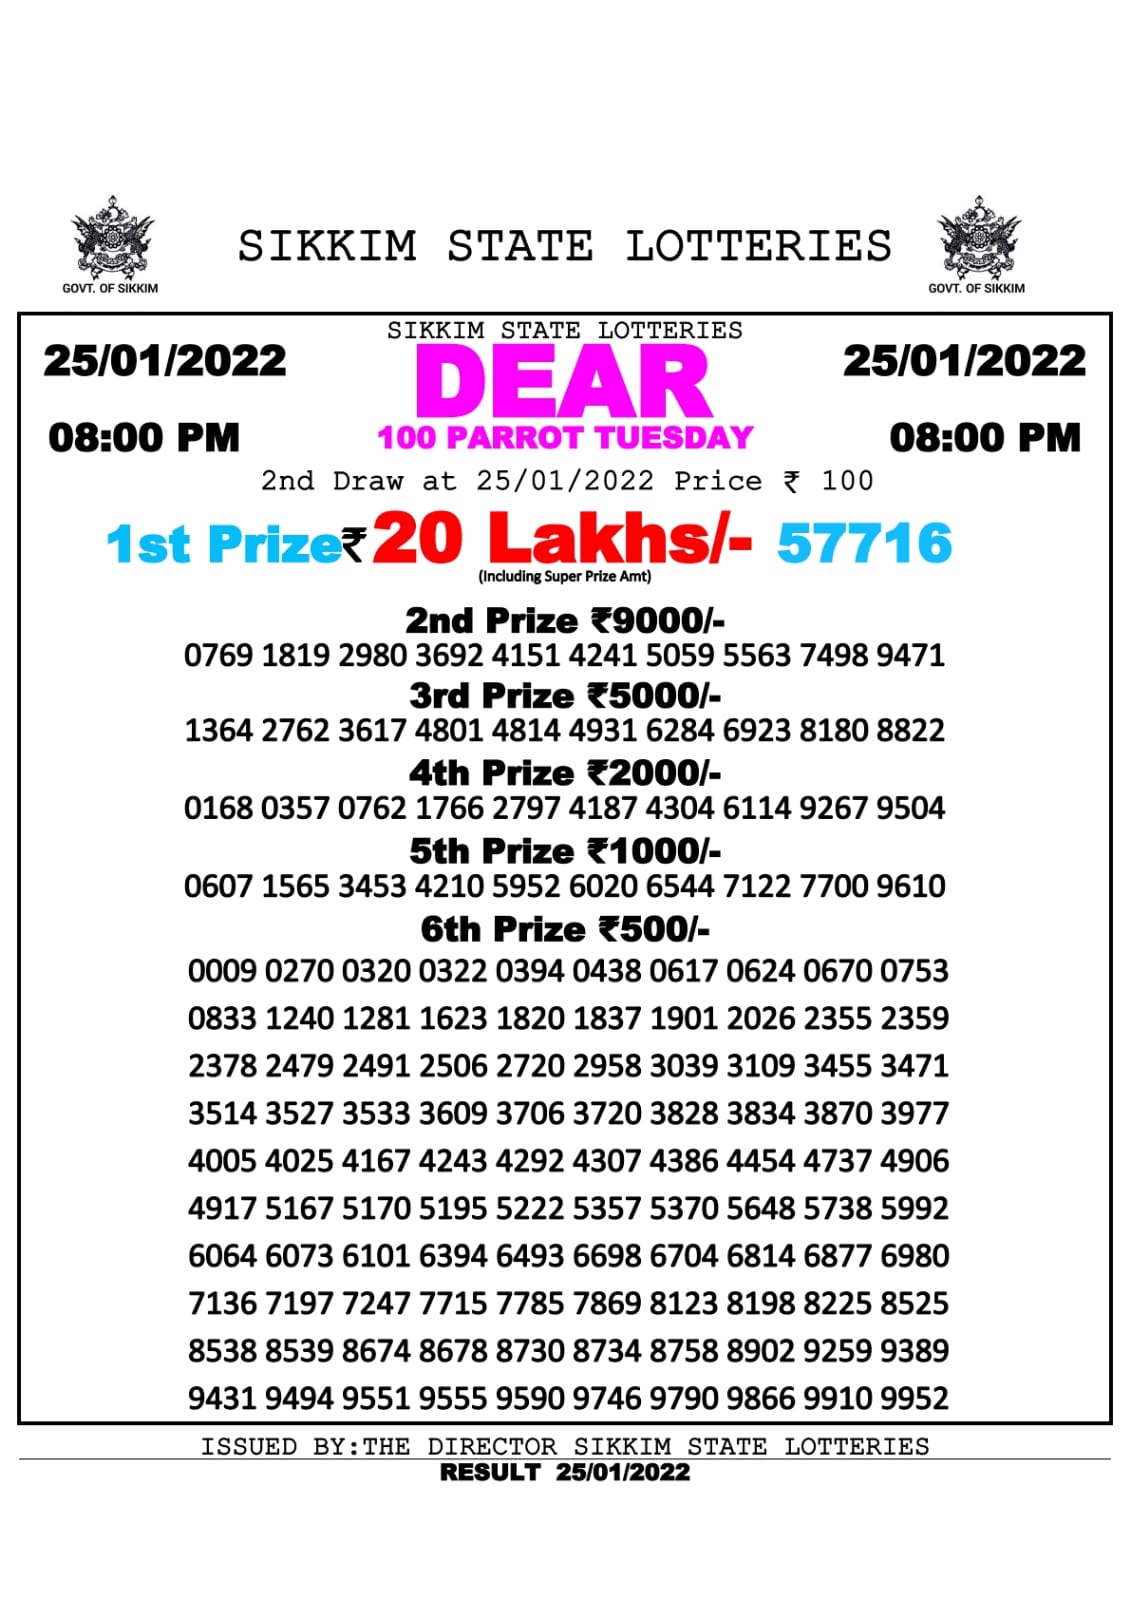 DEAR 100 WEEKLY RESULT 8.00PM 25.01.2022